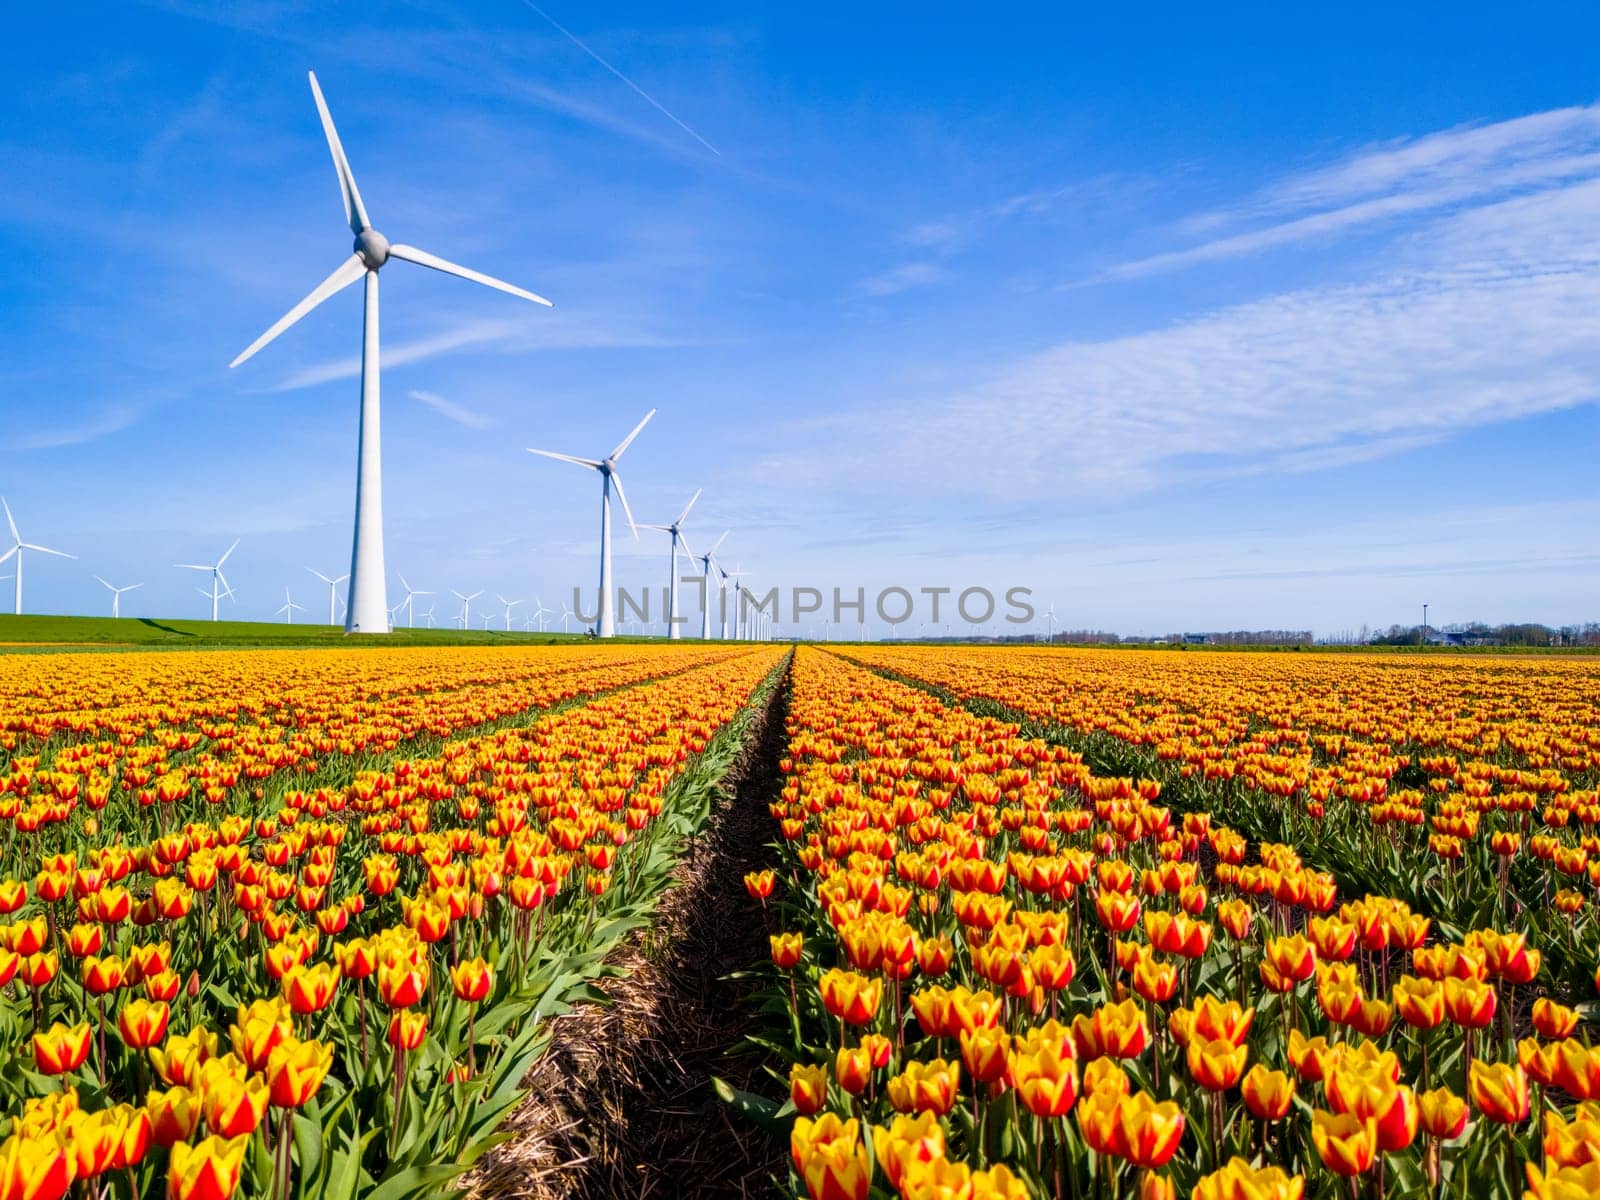 A picturesque scene of colorful tulip flowers swaying in a field with towering windmill turbines by fokkebok